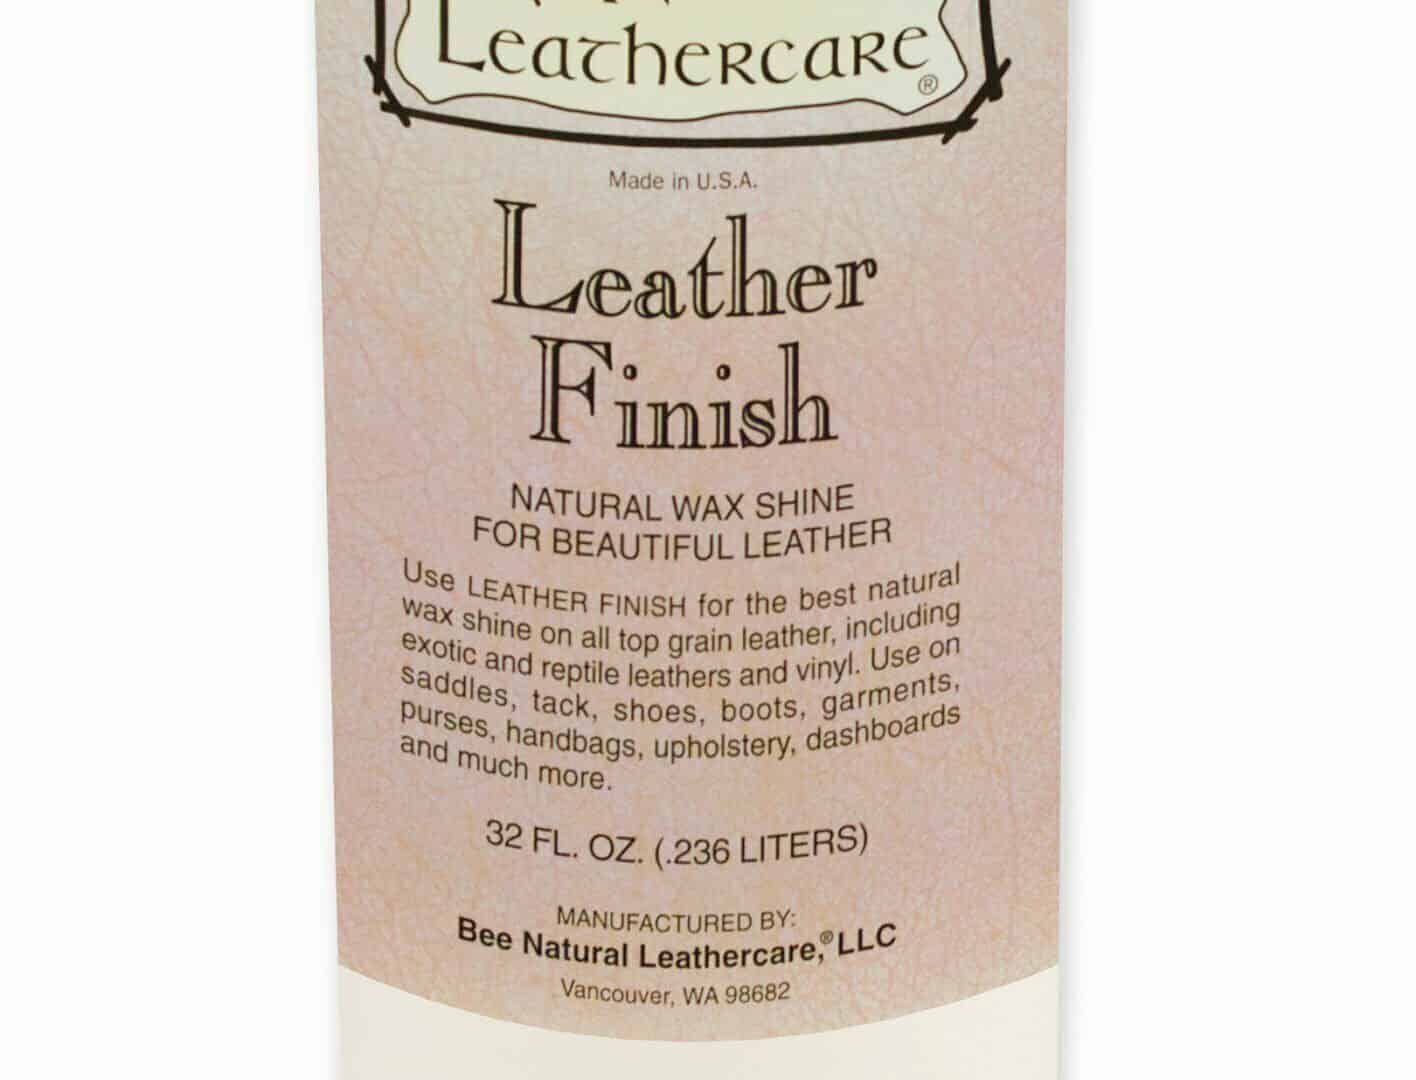 Bee Natural Leather Finish